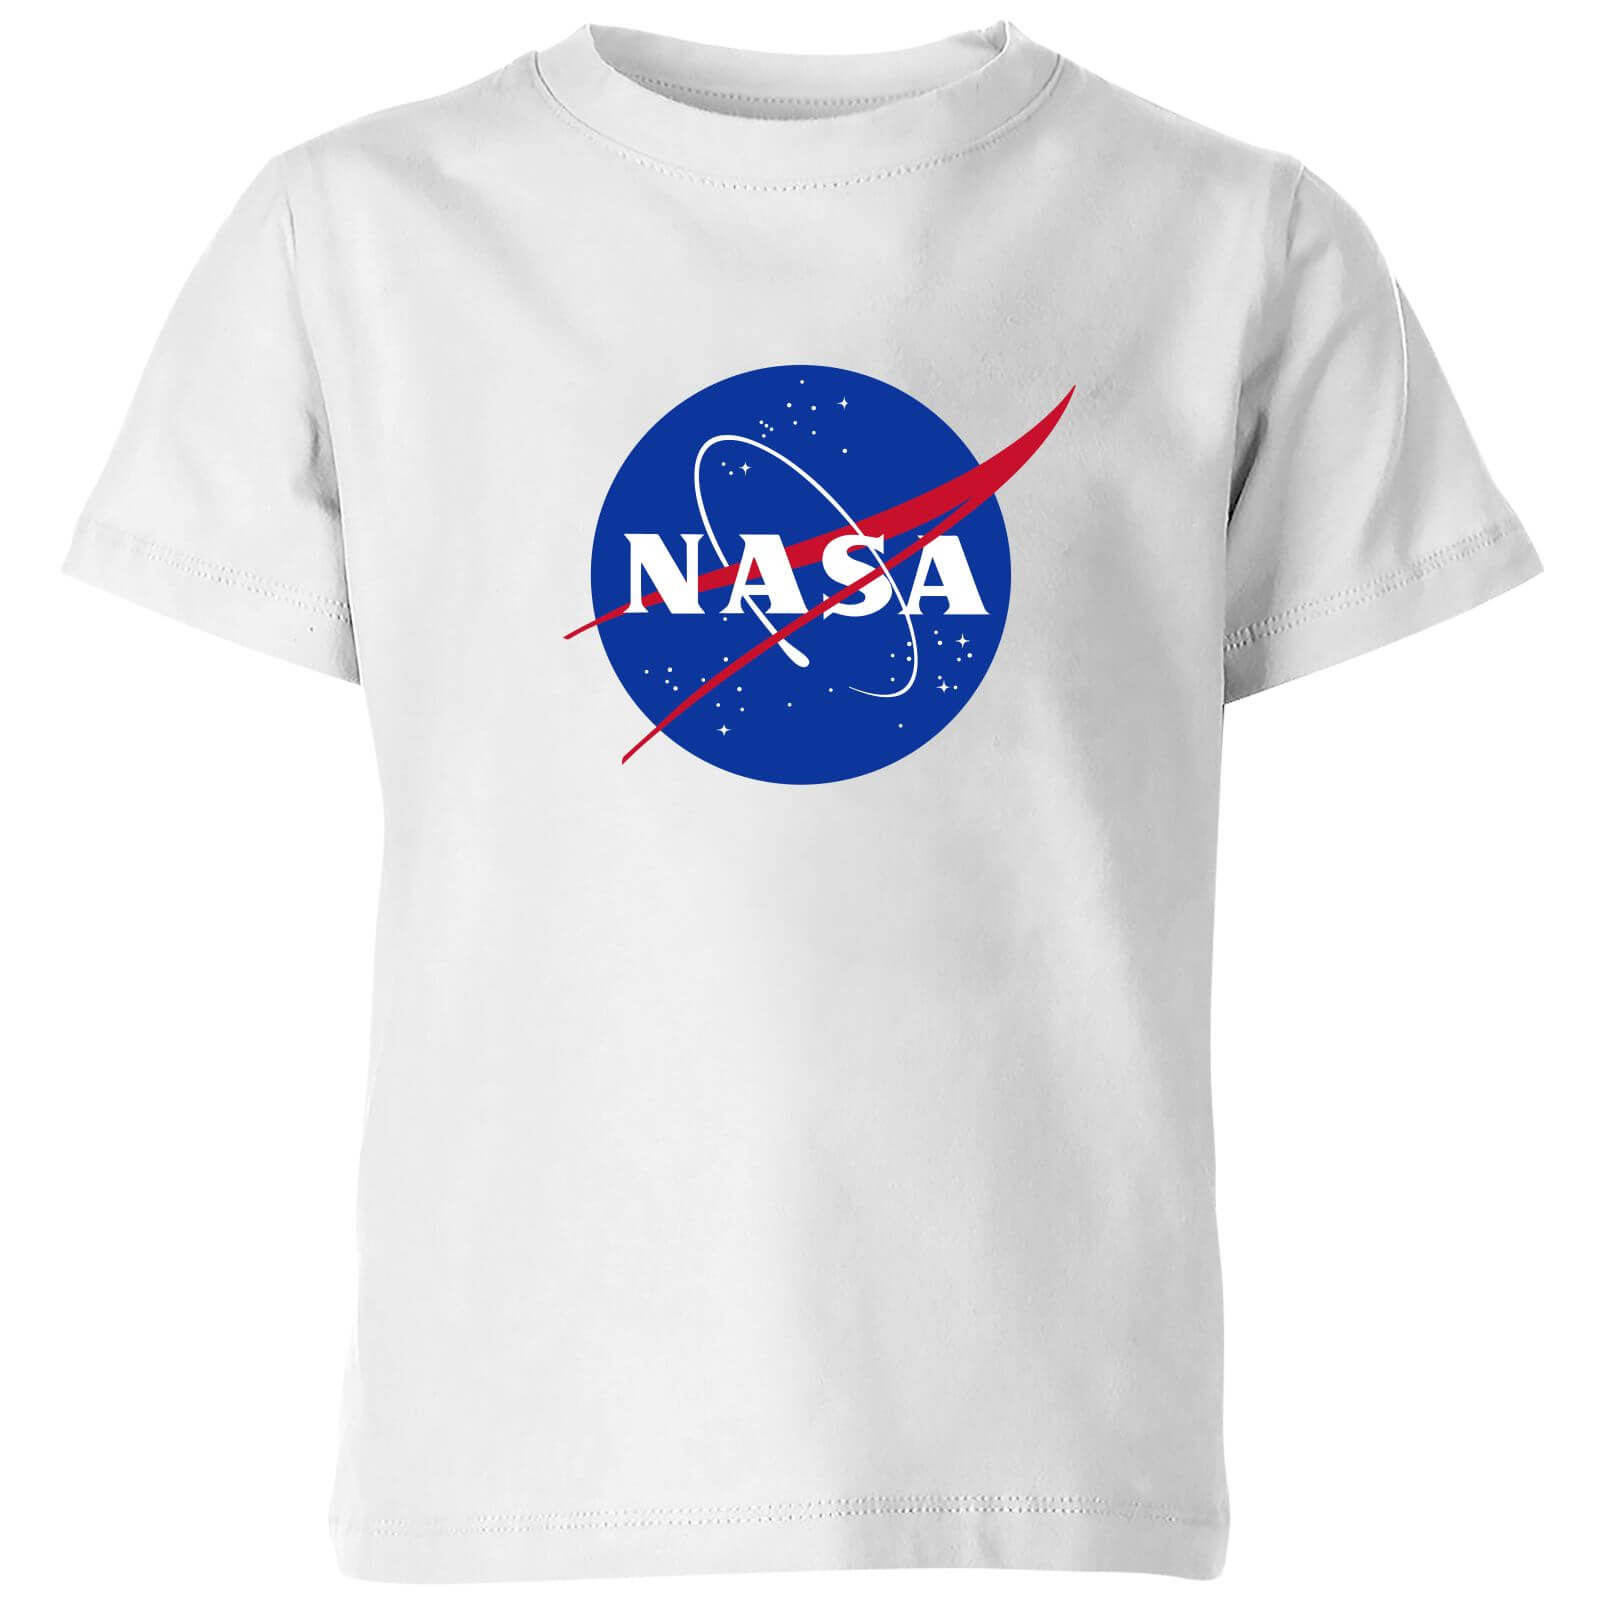 NASA Approved Meatball Logo Graphic Space Vintage Youth Kids Girl Boy T-Shirt